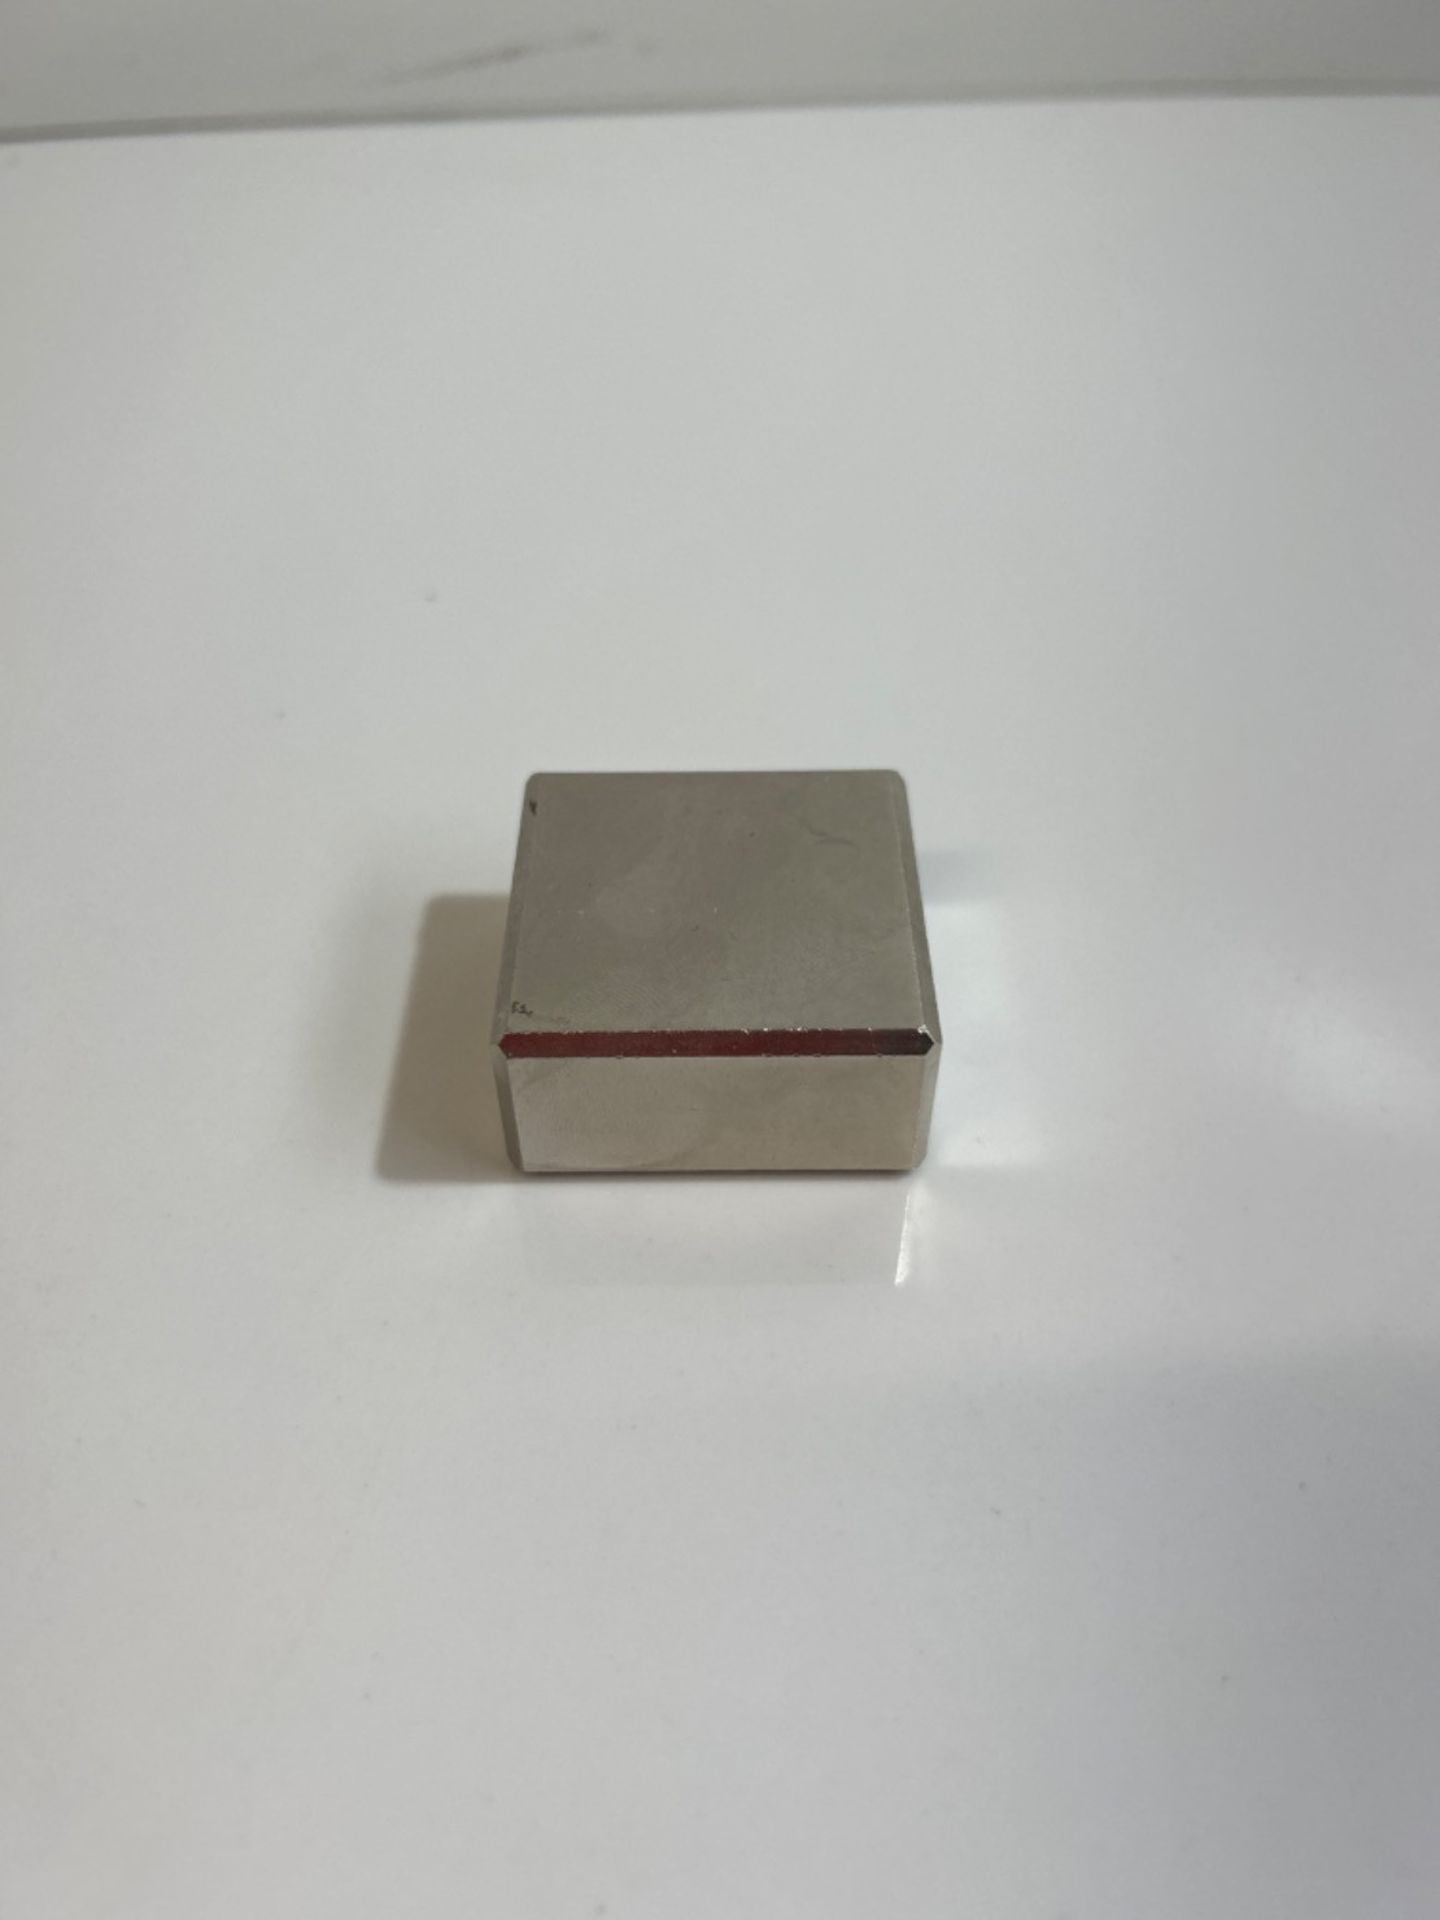 FINDMAG 40 x 40 x 20 mm Strong Magnet, Heavy Duty Magnets Strong, Neodymium Magnets, Permanent Rare - Image 2 of 3